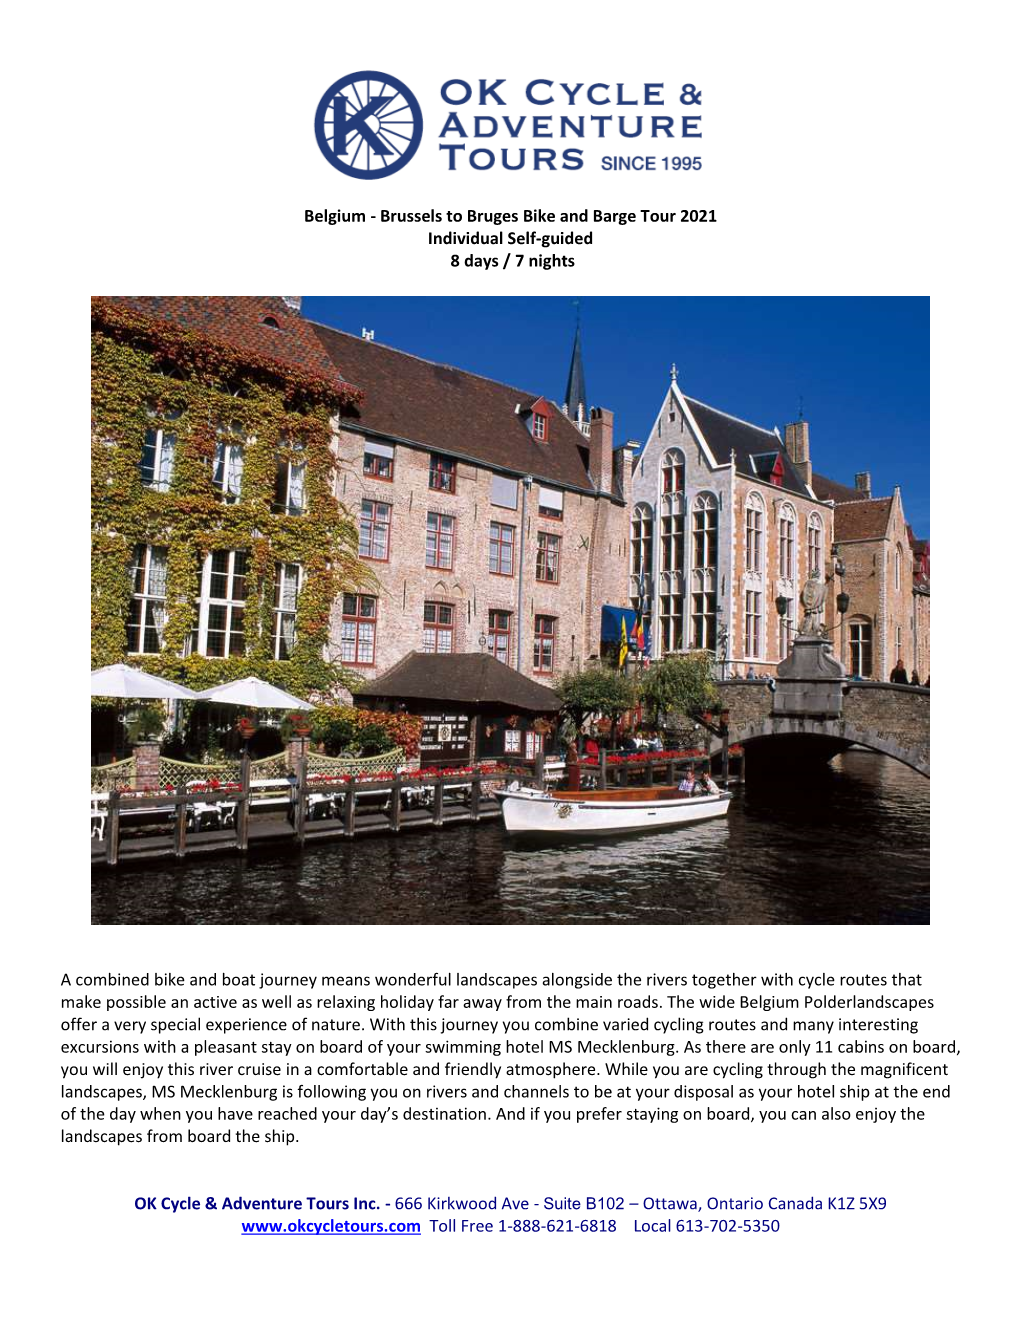 Belgium - Brussels to Bruges Bike and Barge Tour 2021 Individual Self-Guided 8 Days / 7 Nights